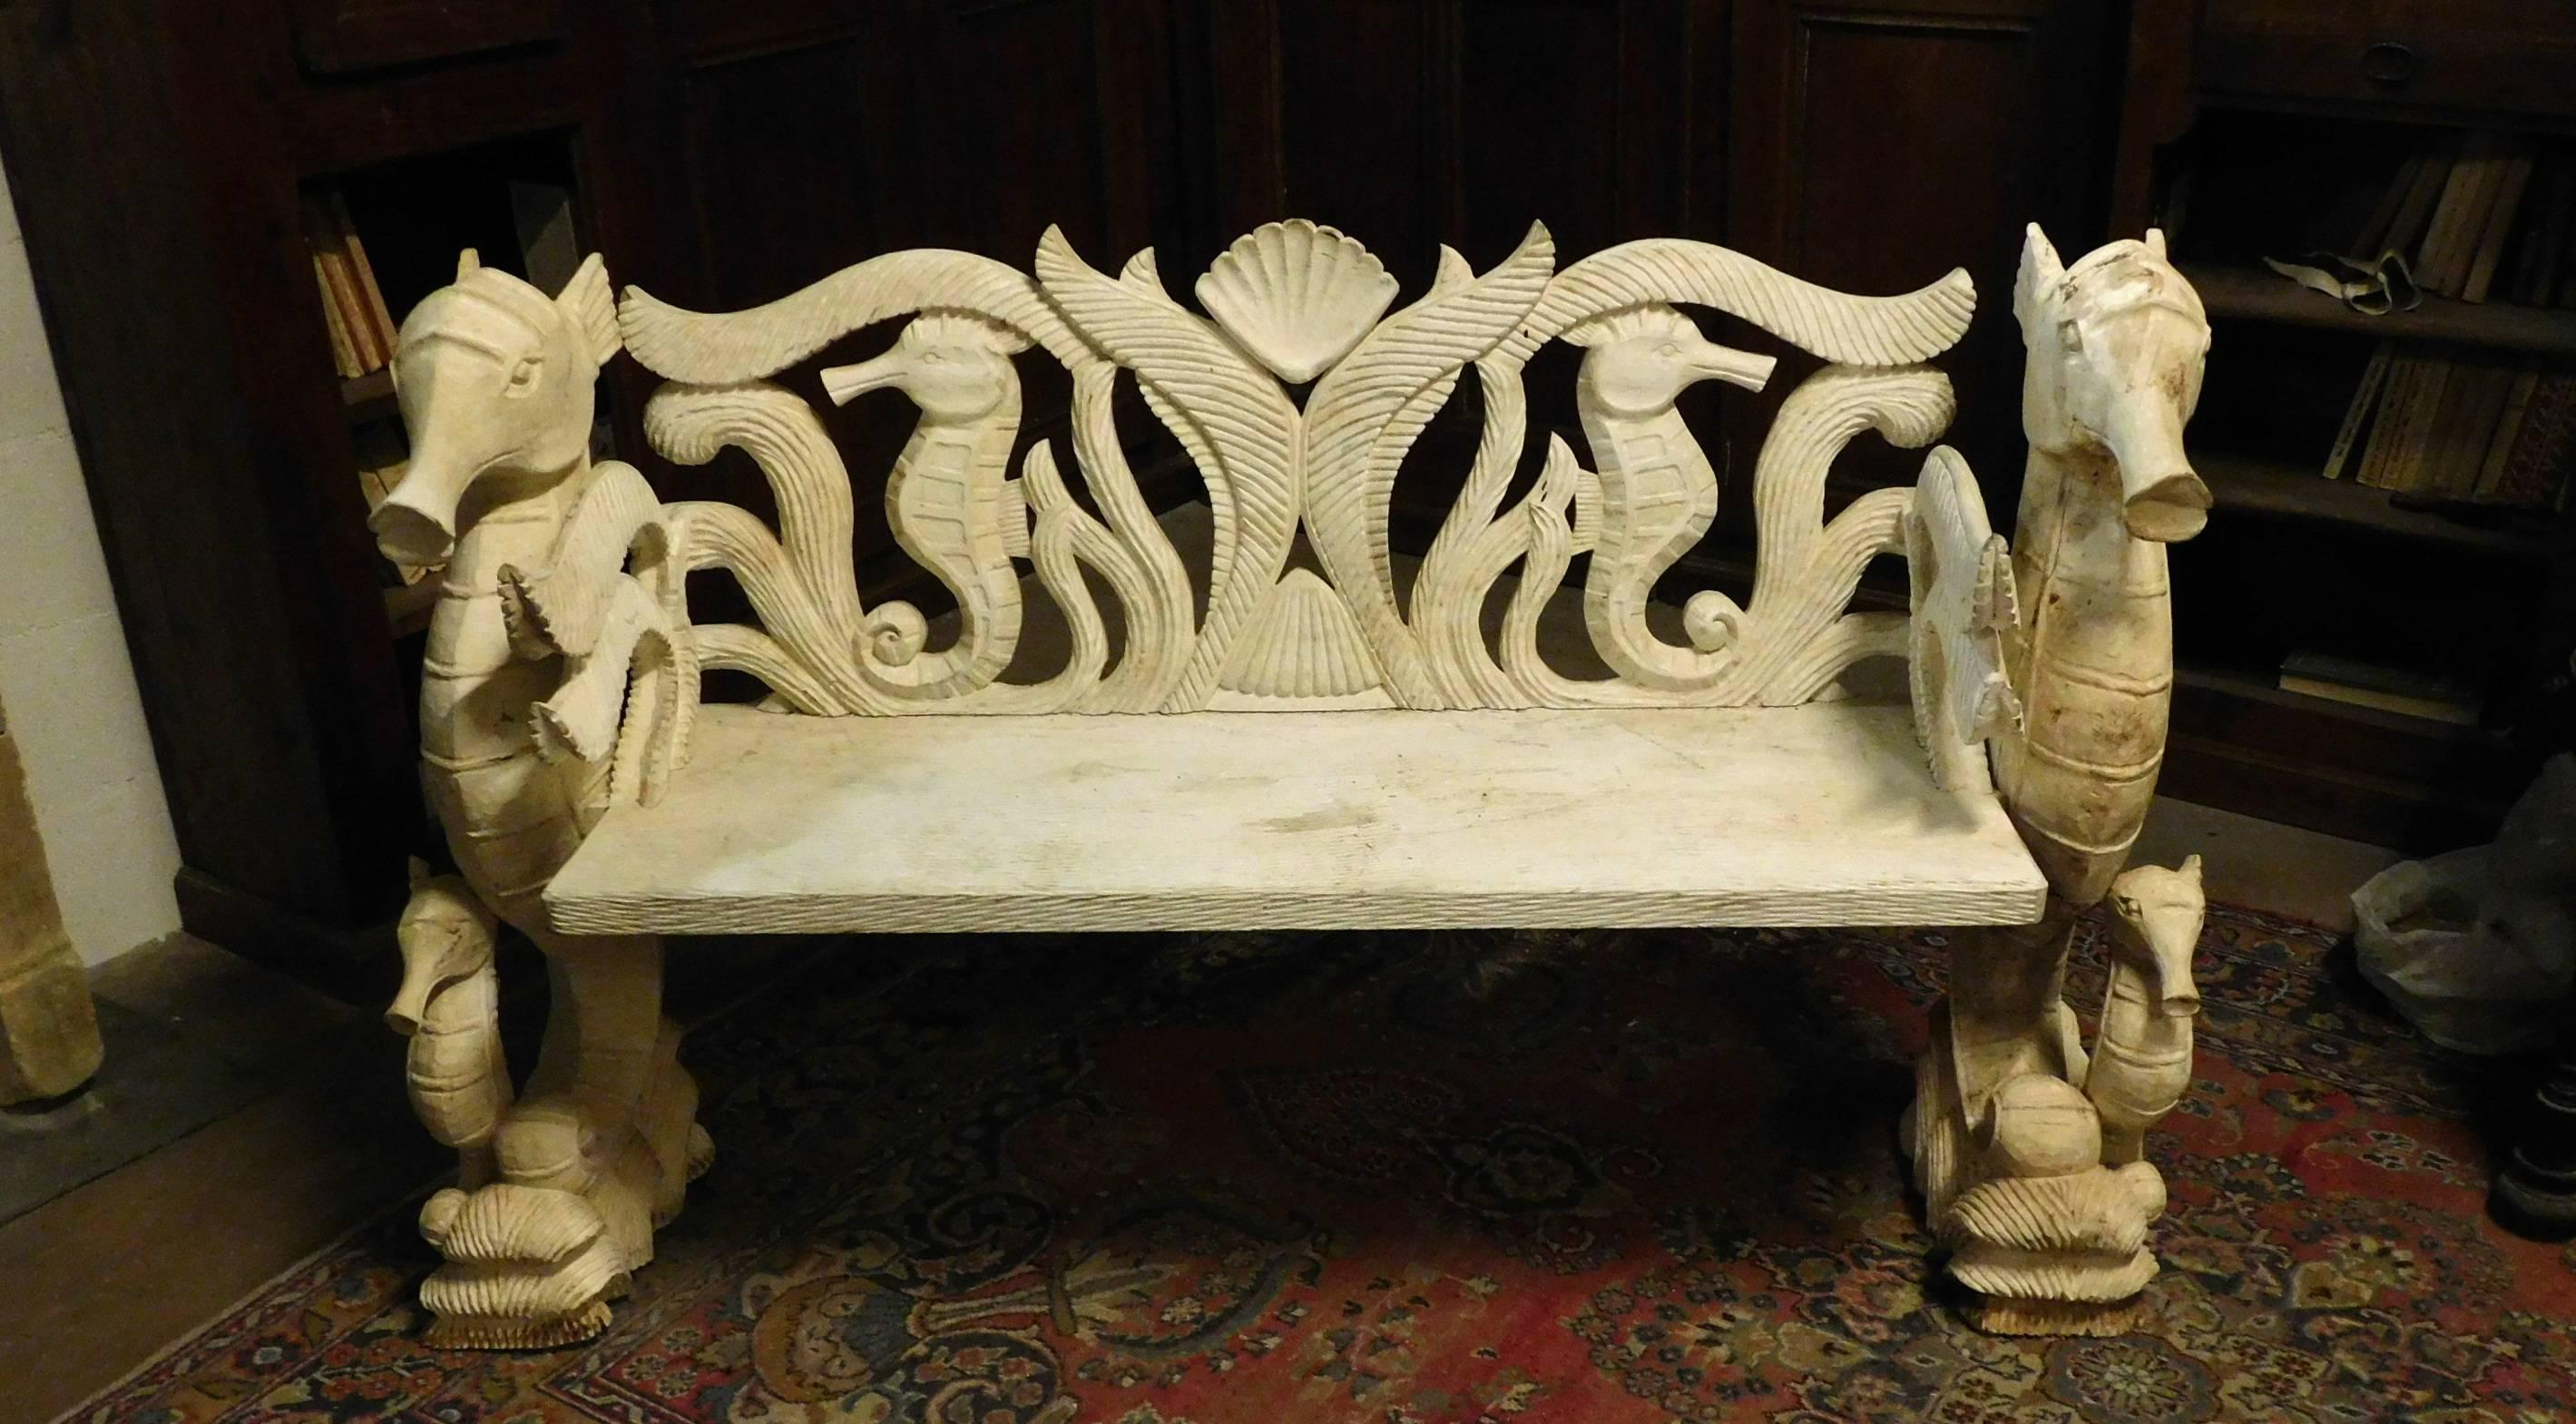 Antique lacquered bench.